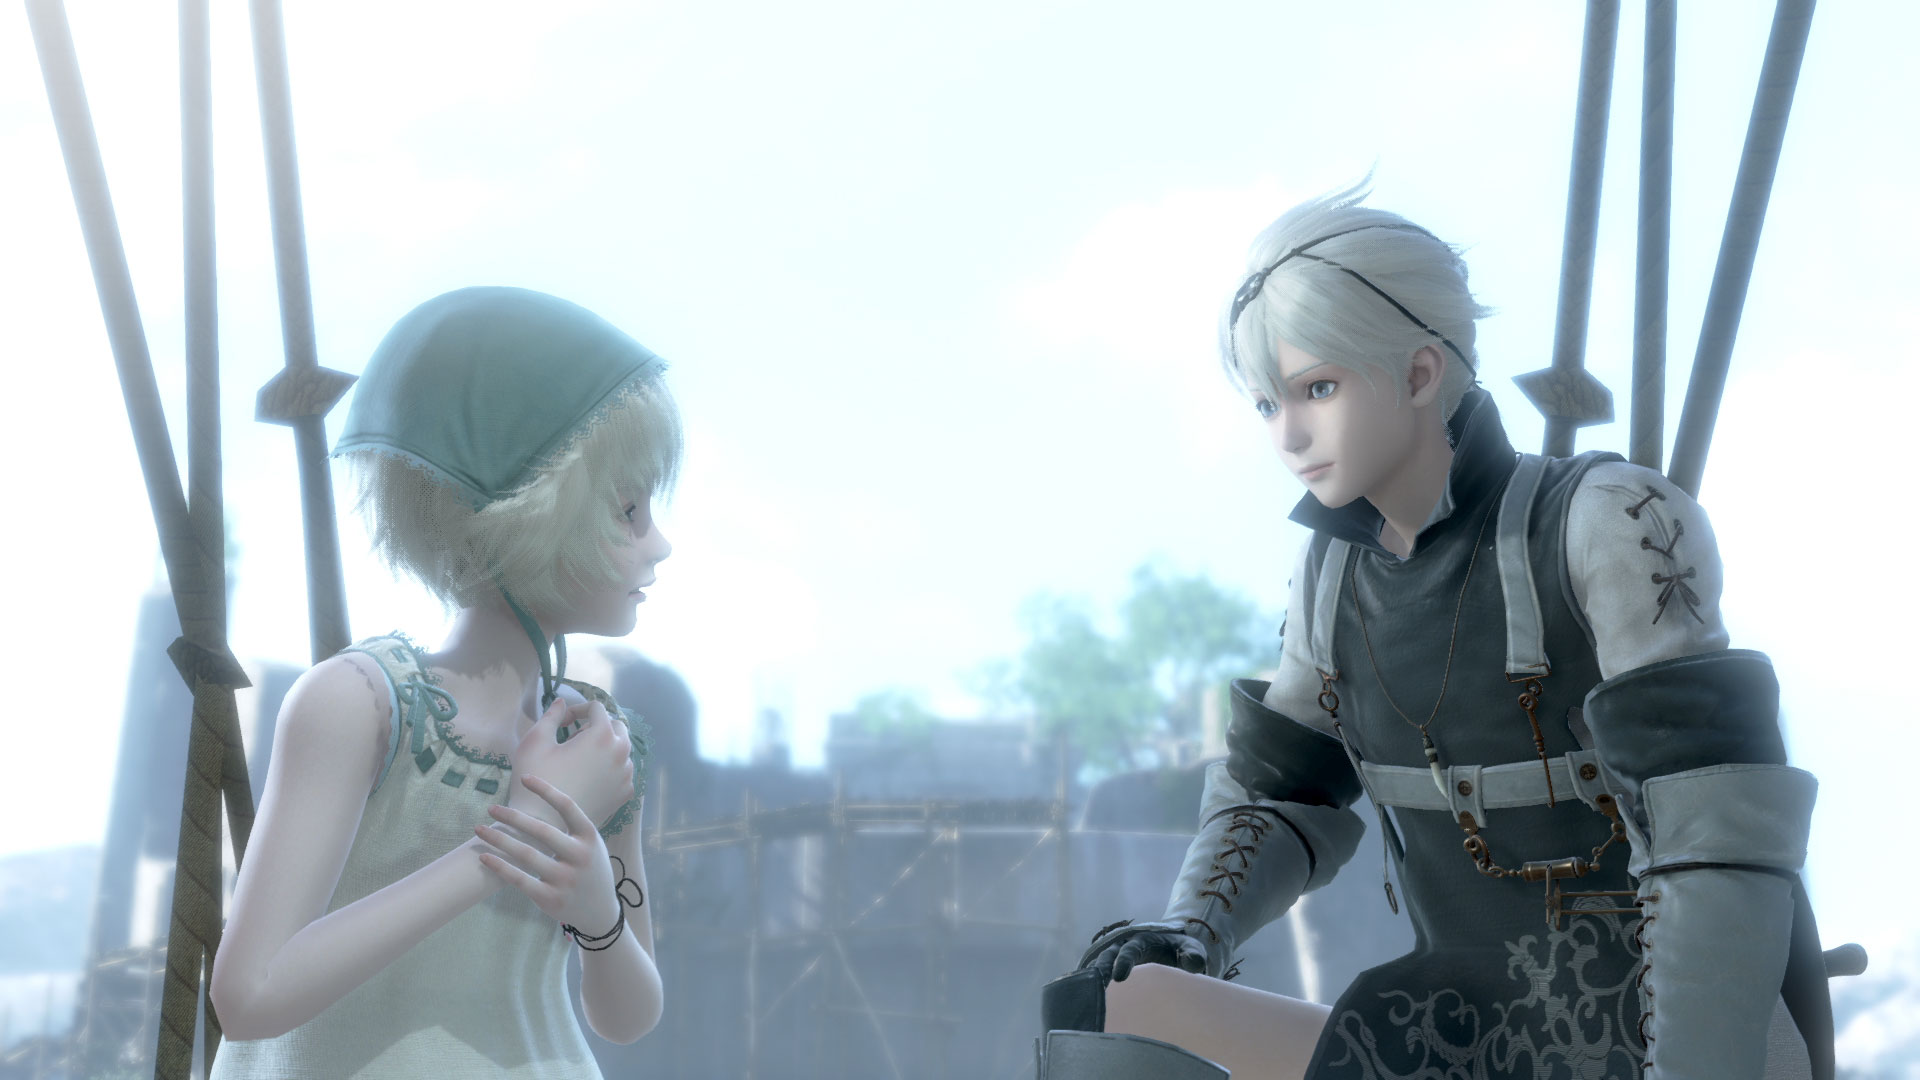 Review: NieR Replicant Remains Haunting and Thought-Provoking